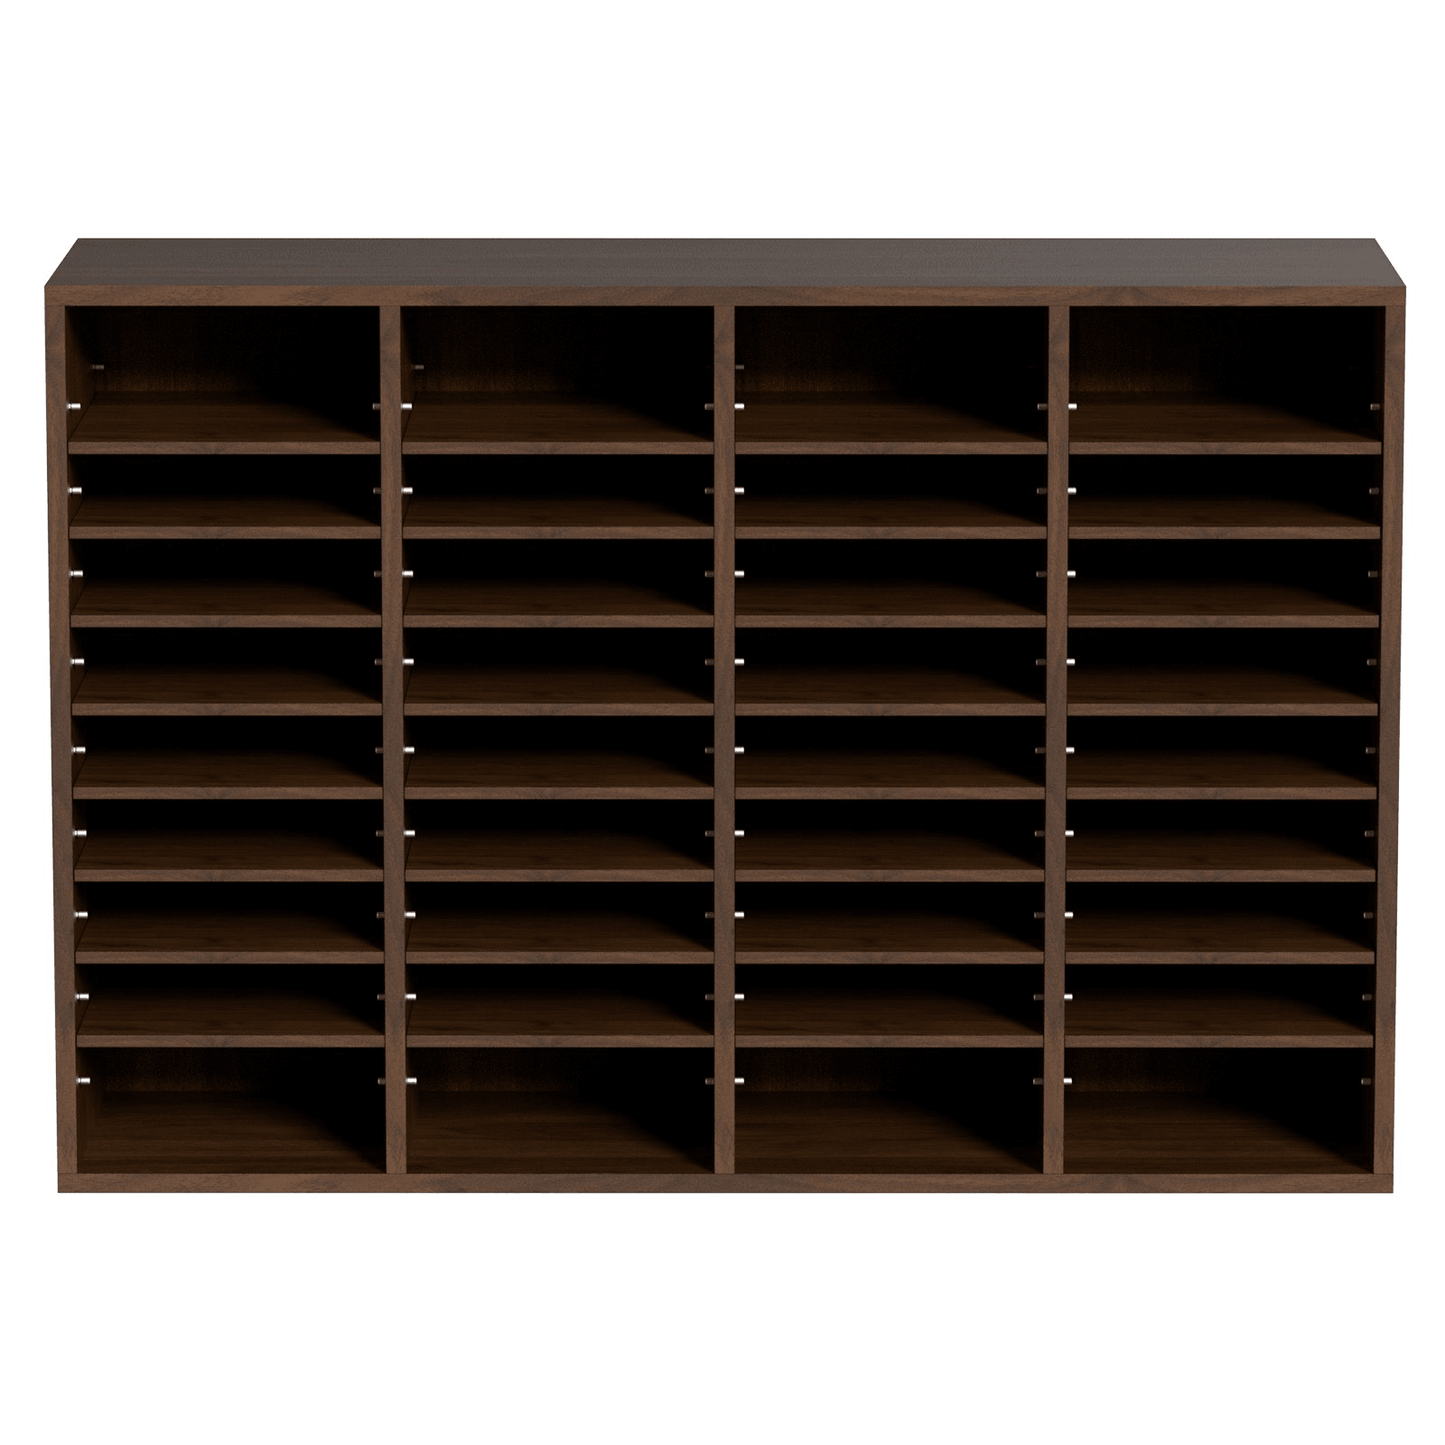 VEVOR Literature Organizers, 36 Compartments Office Mailbox with Adjustable Shelves, Wood Literature Sorter 39.3x12x26.8 inches for Office, Home, Classroom, Mailrooms Organization, EPA Certified Brown - Loomini